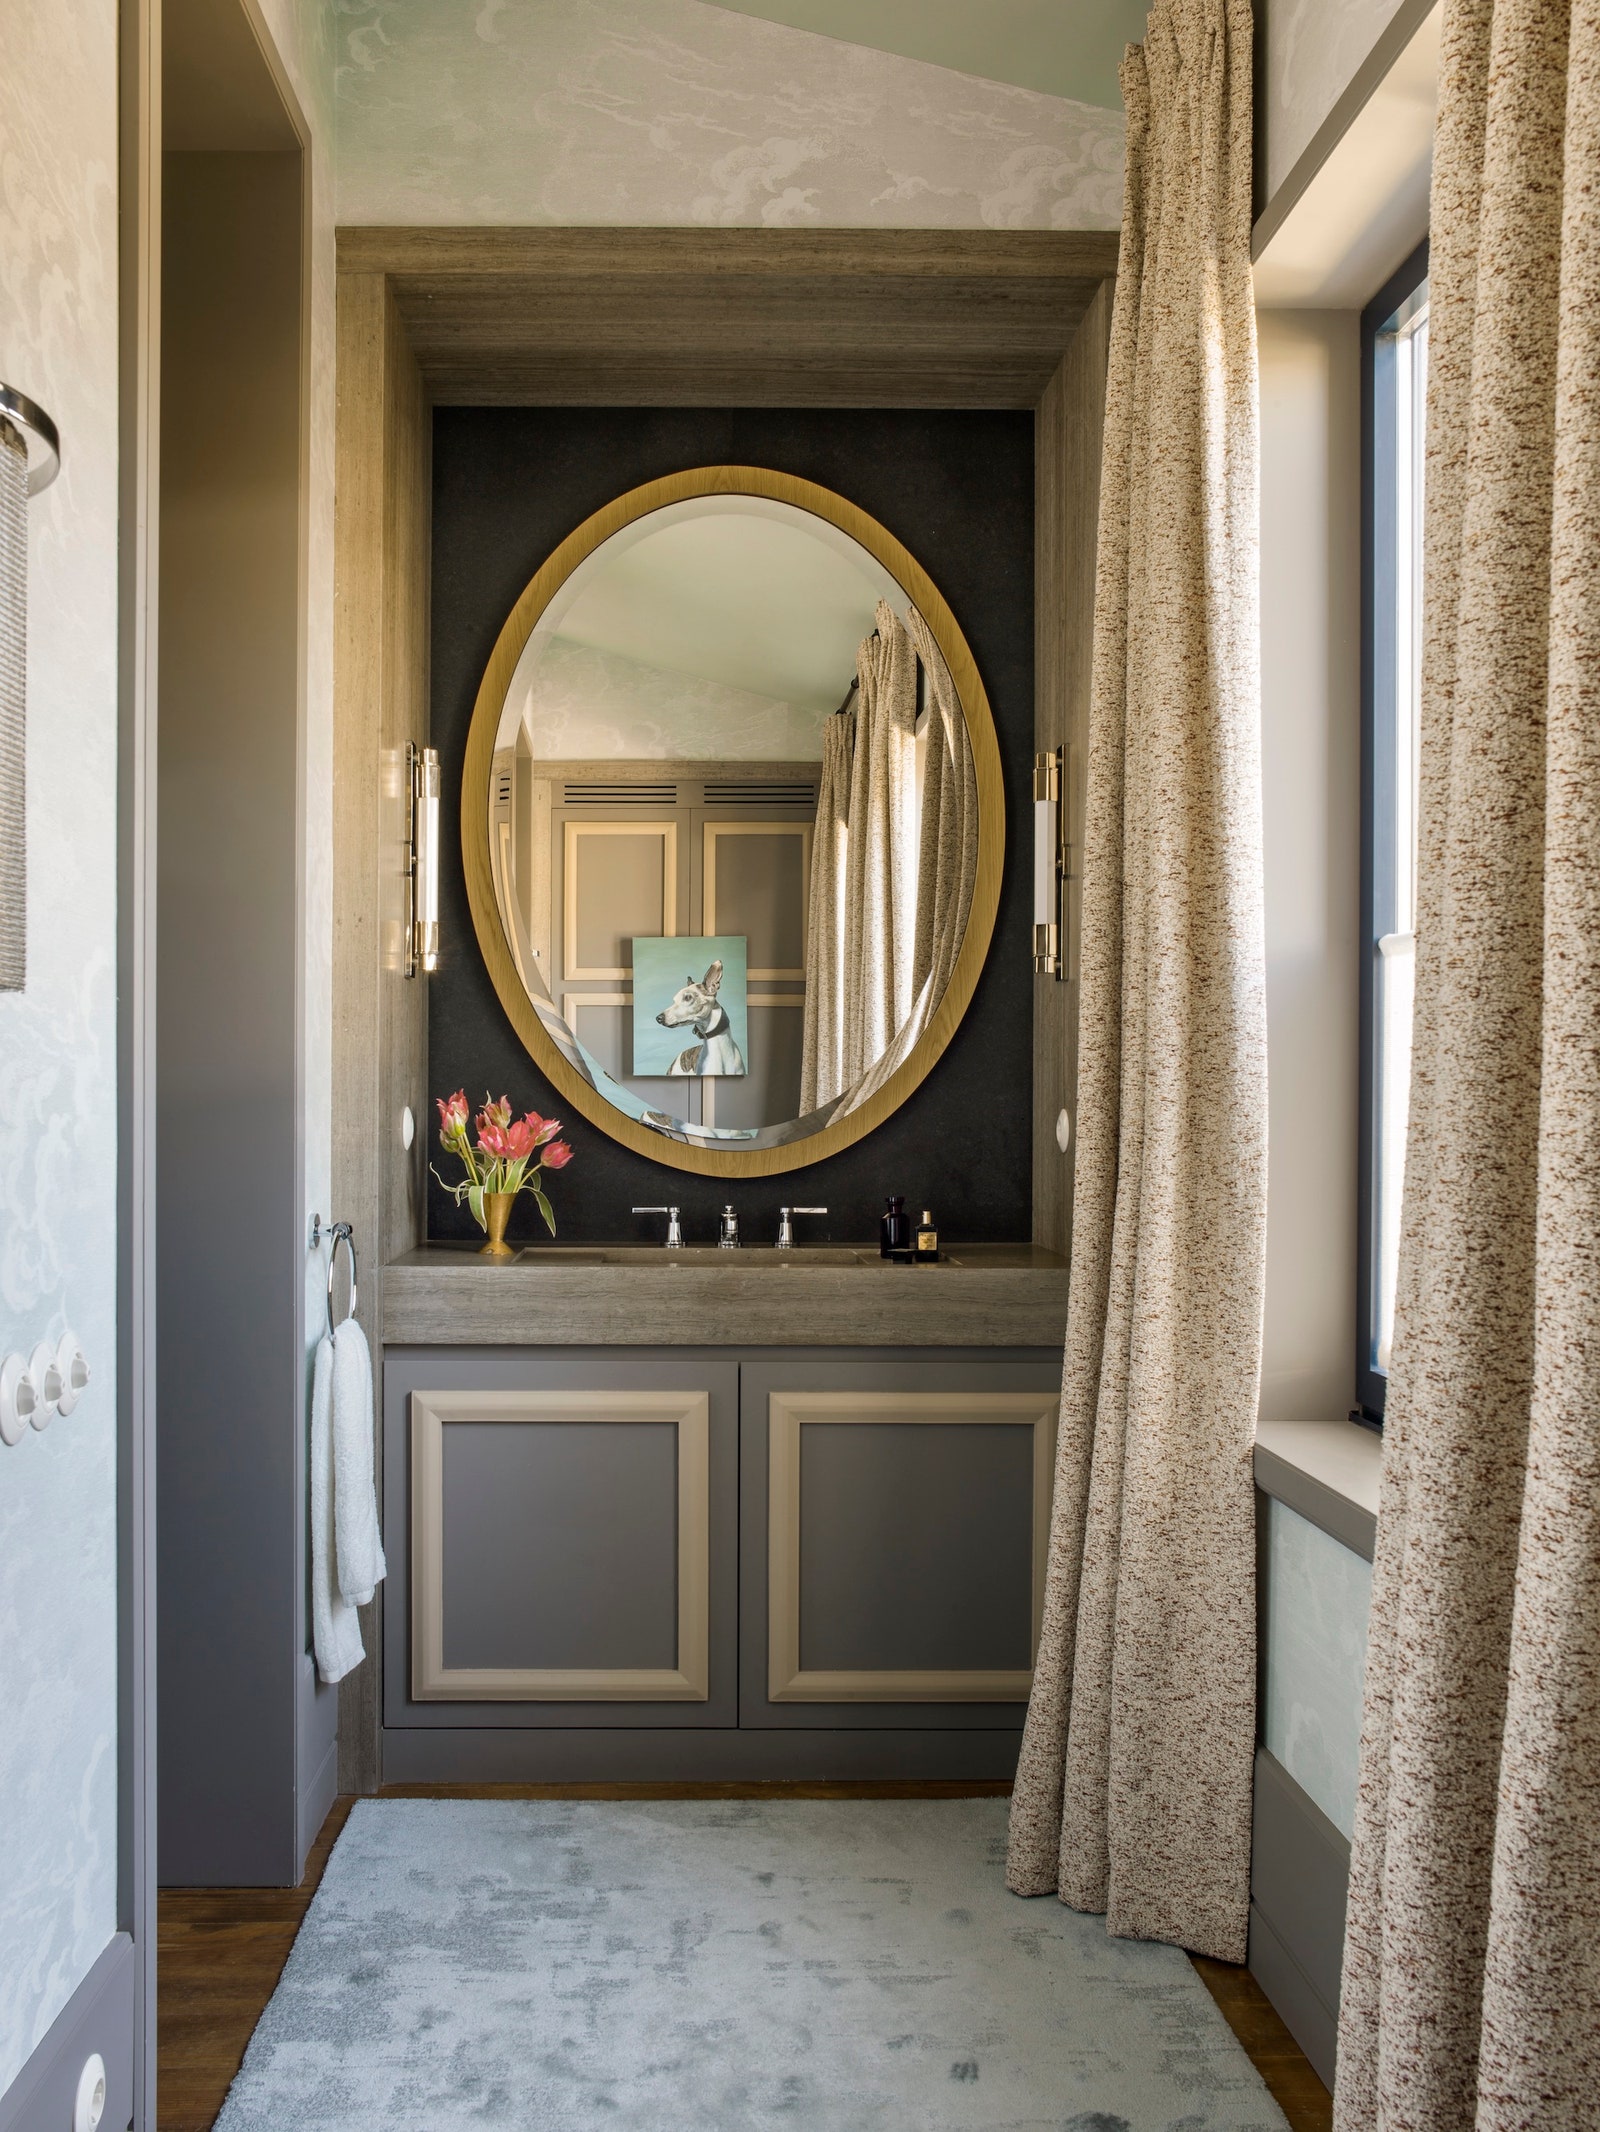 A luxe dressing room gives a hotel vibe.